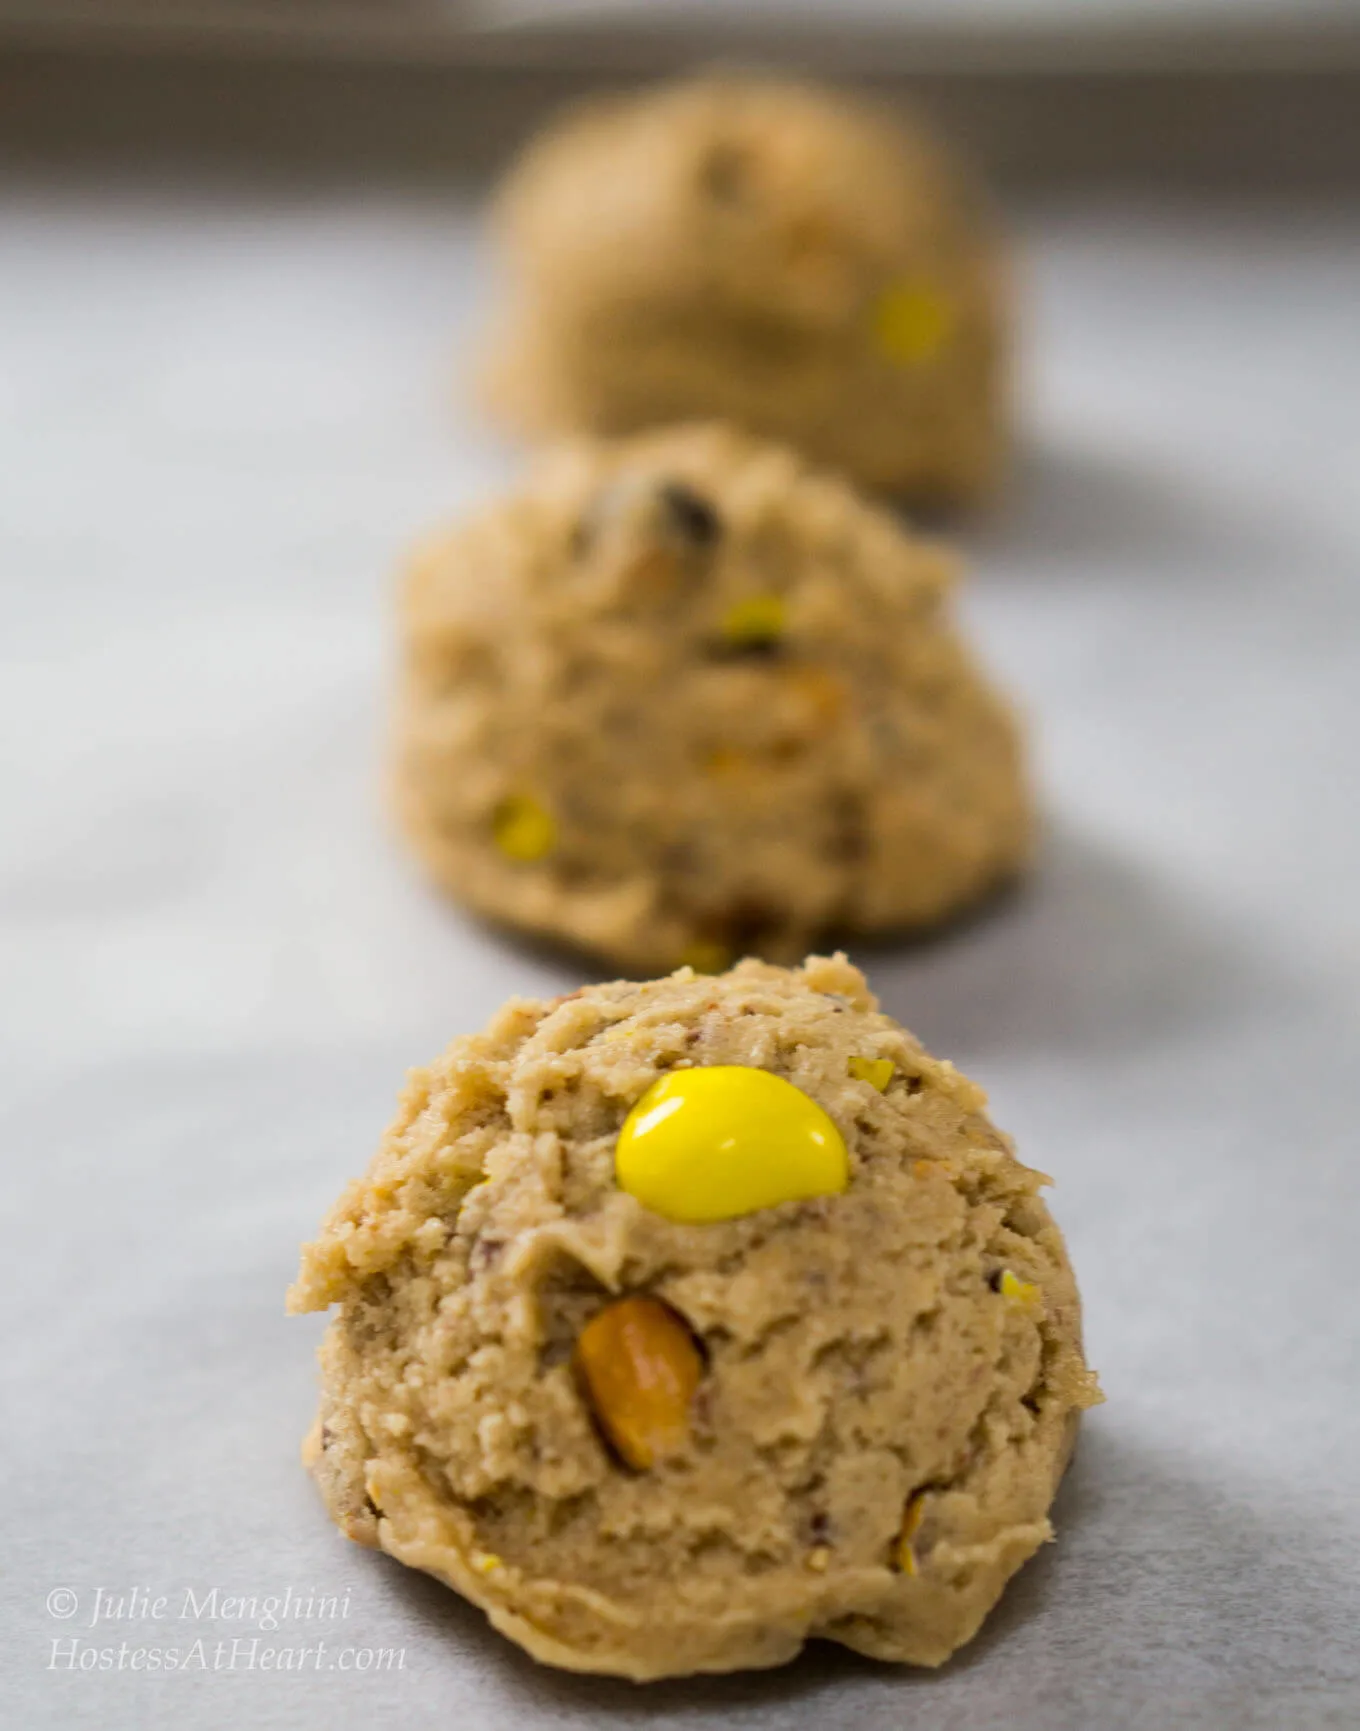 M&M's® Honey Nut Cookies taste like a big ole hug. They are warm from the fresh honey and the delicious flavor of the M&M's® Honey Nut candy gives these cookies a sweet nutty flavor | HostessAtHeart.com